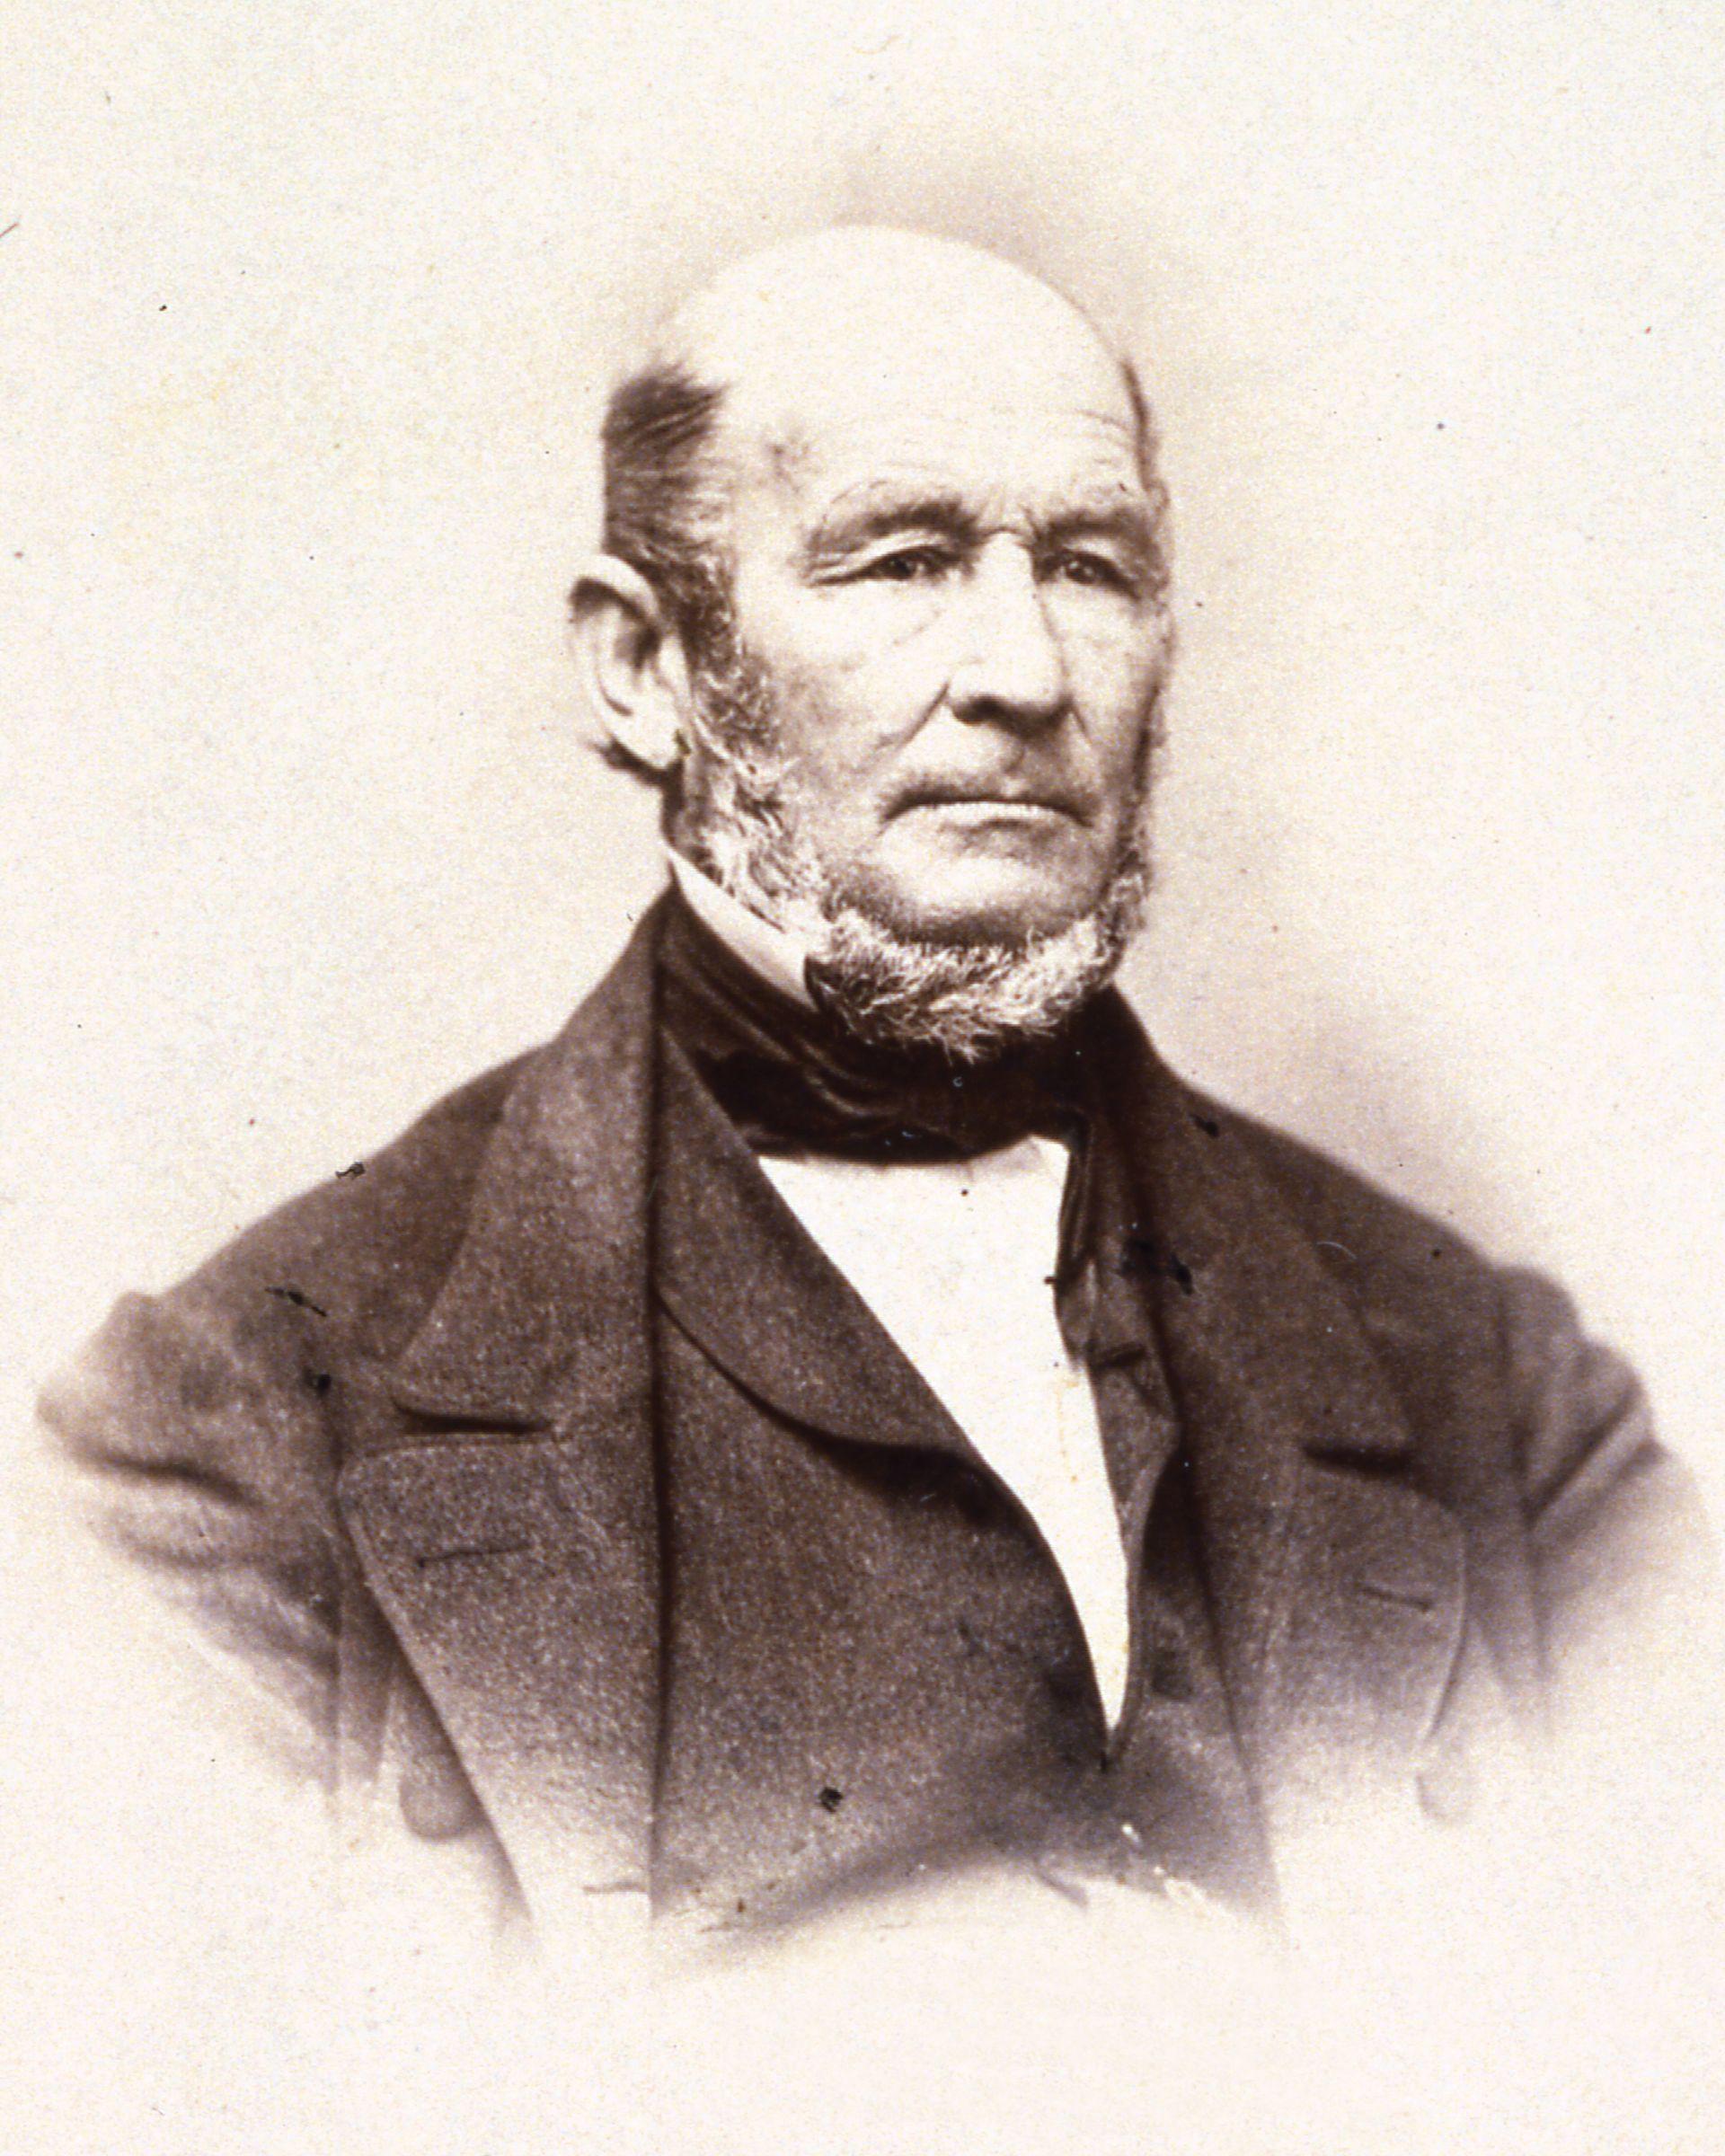 A historic photo of Heber C. Kimball